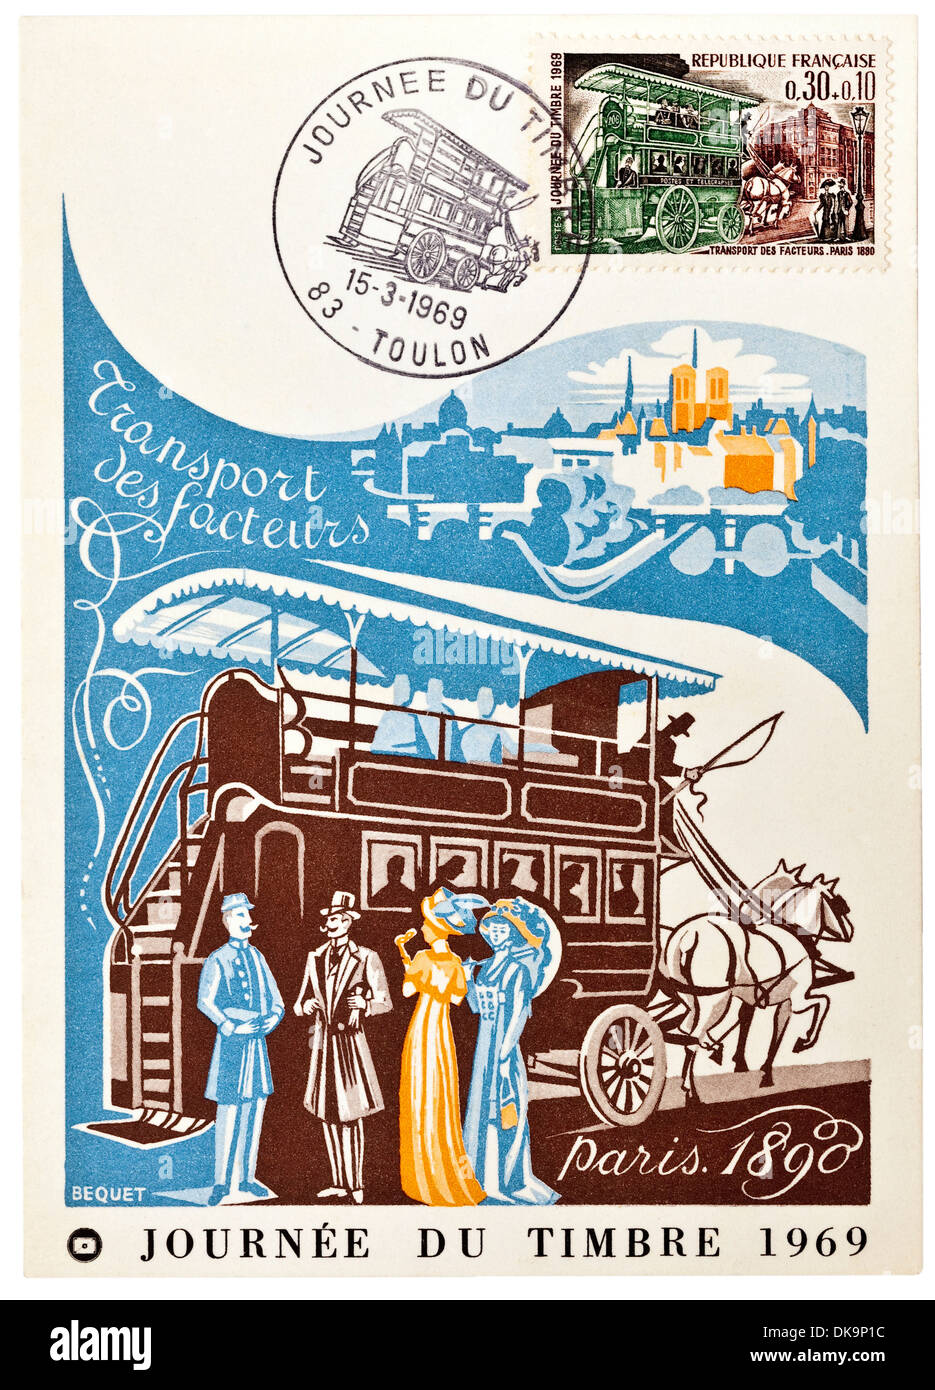 1969 French postcard depicting horse-drawn post bus in Paris 1890 - 'Journée du Timbre' (Stamp Day). Stock Photo